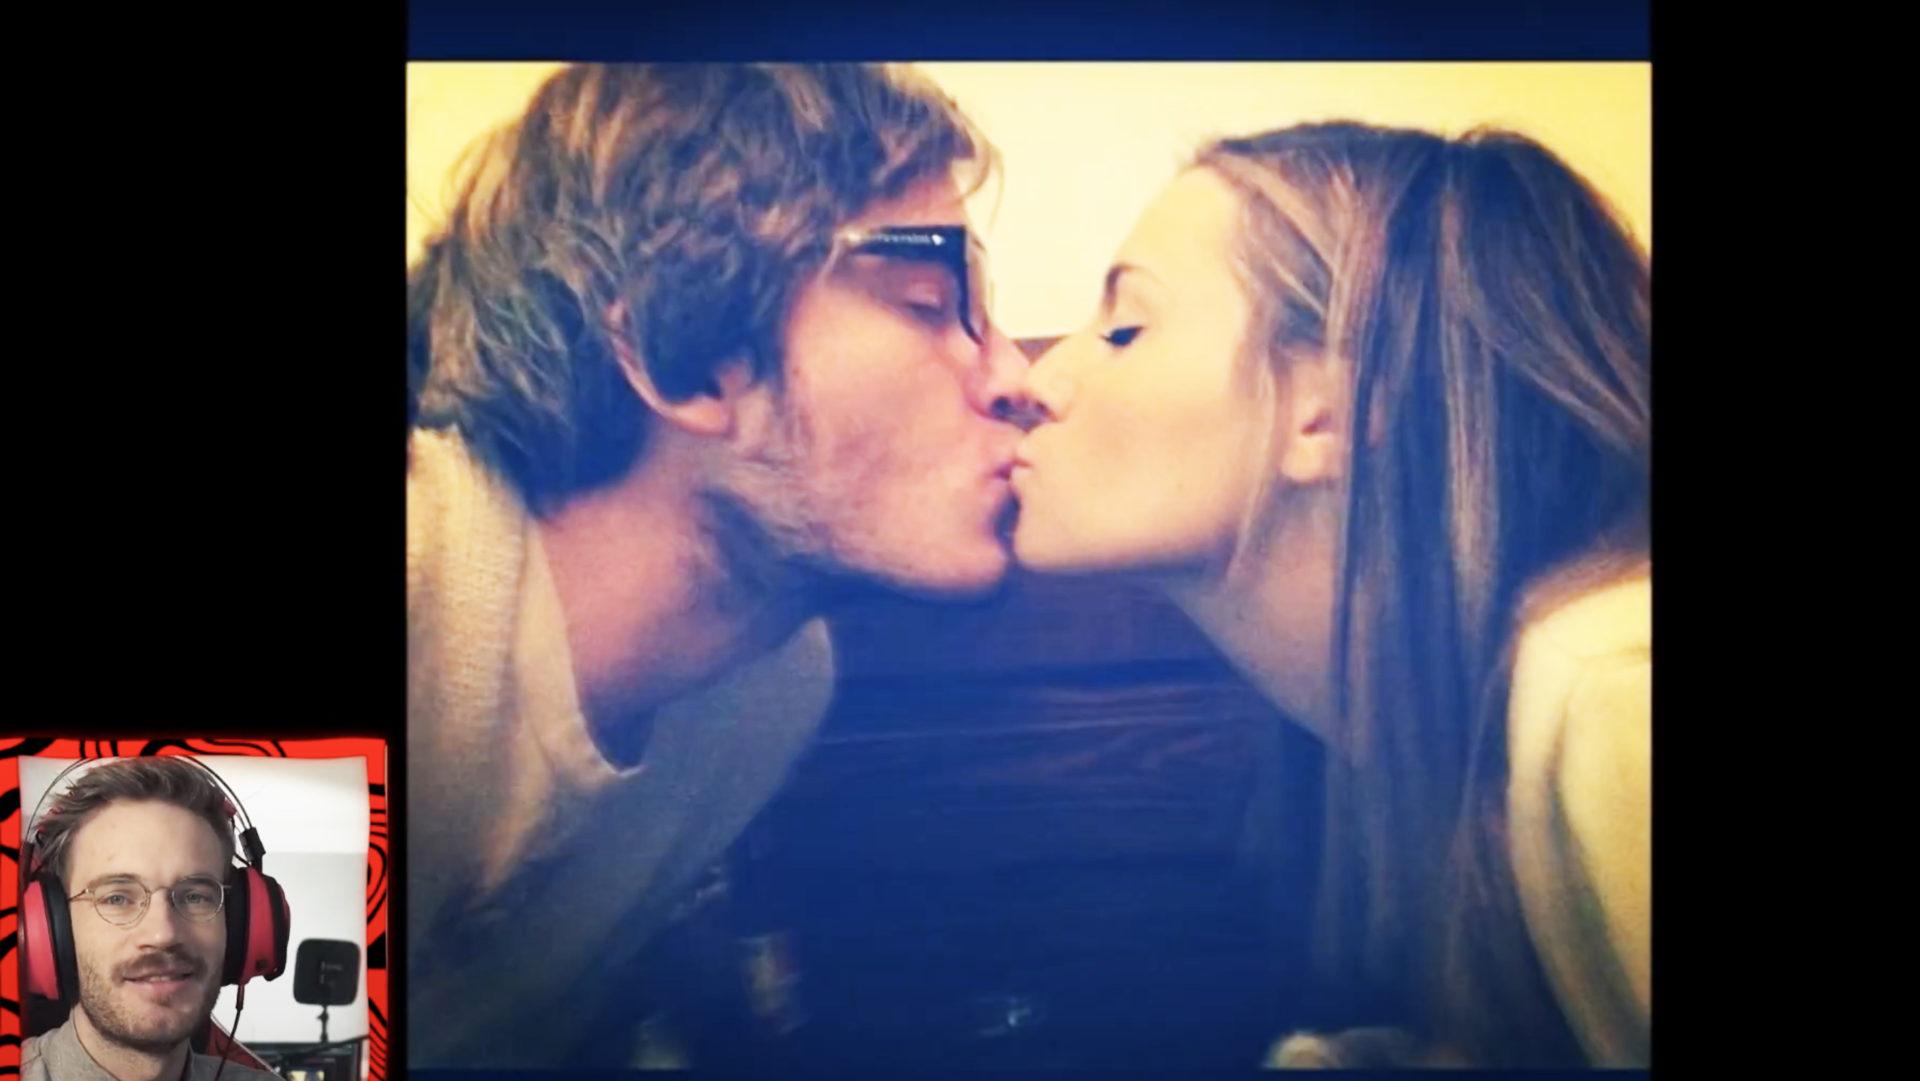 PewDiePie reacts to Instagram photo of him and Marzia.